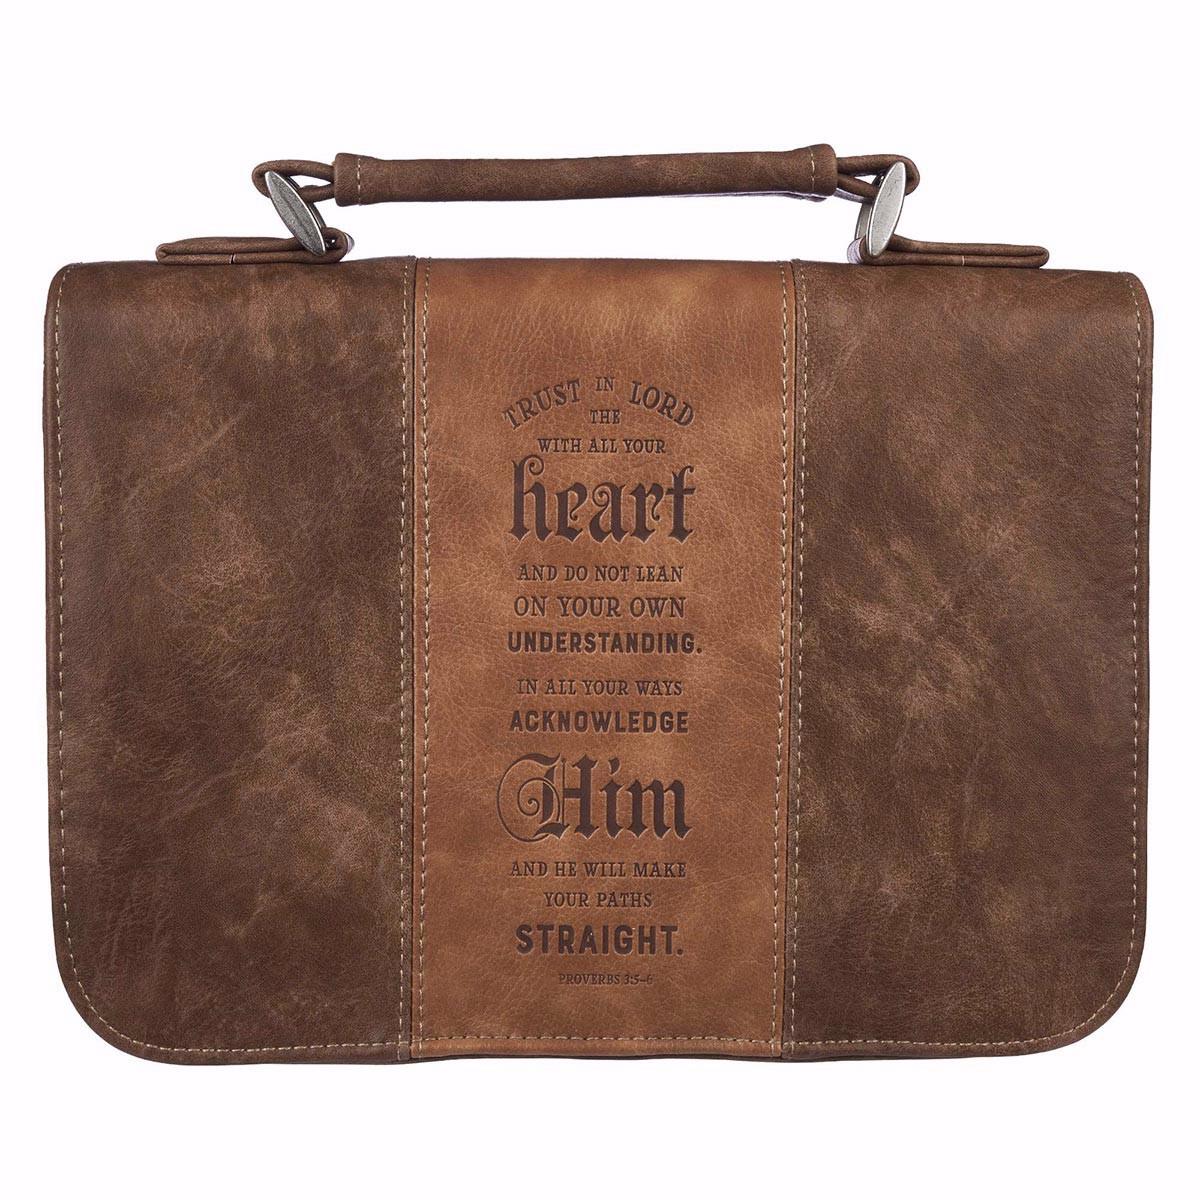 Christian Art Gifts 149145 Trust in the Lord Classic Lux Leather Bible Cover, Brown - Medium